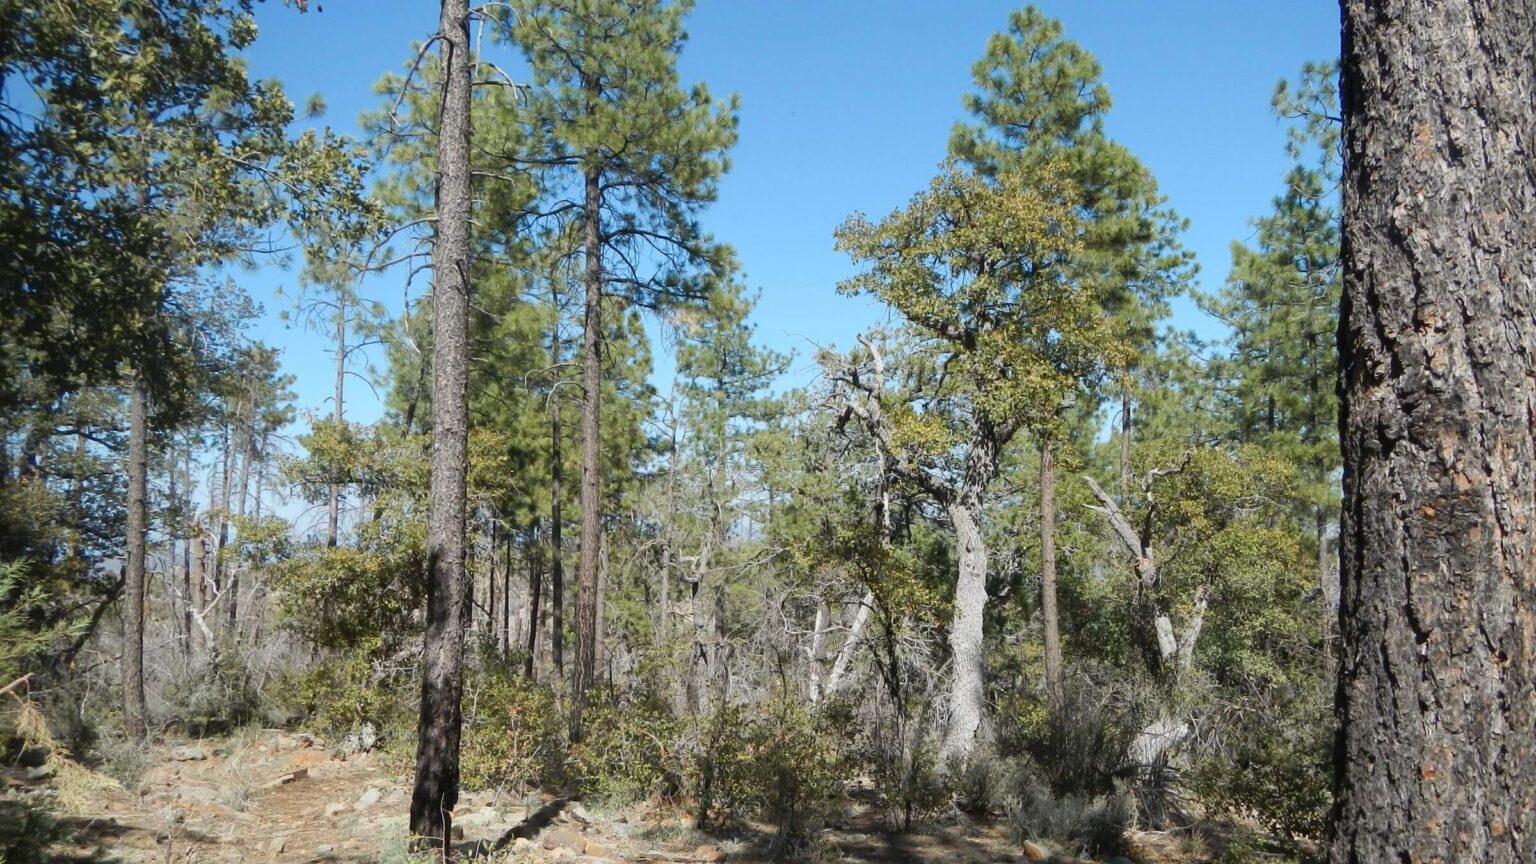 Sierra Ancha Wilderness, backpacking, pine survived fires, April